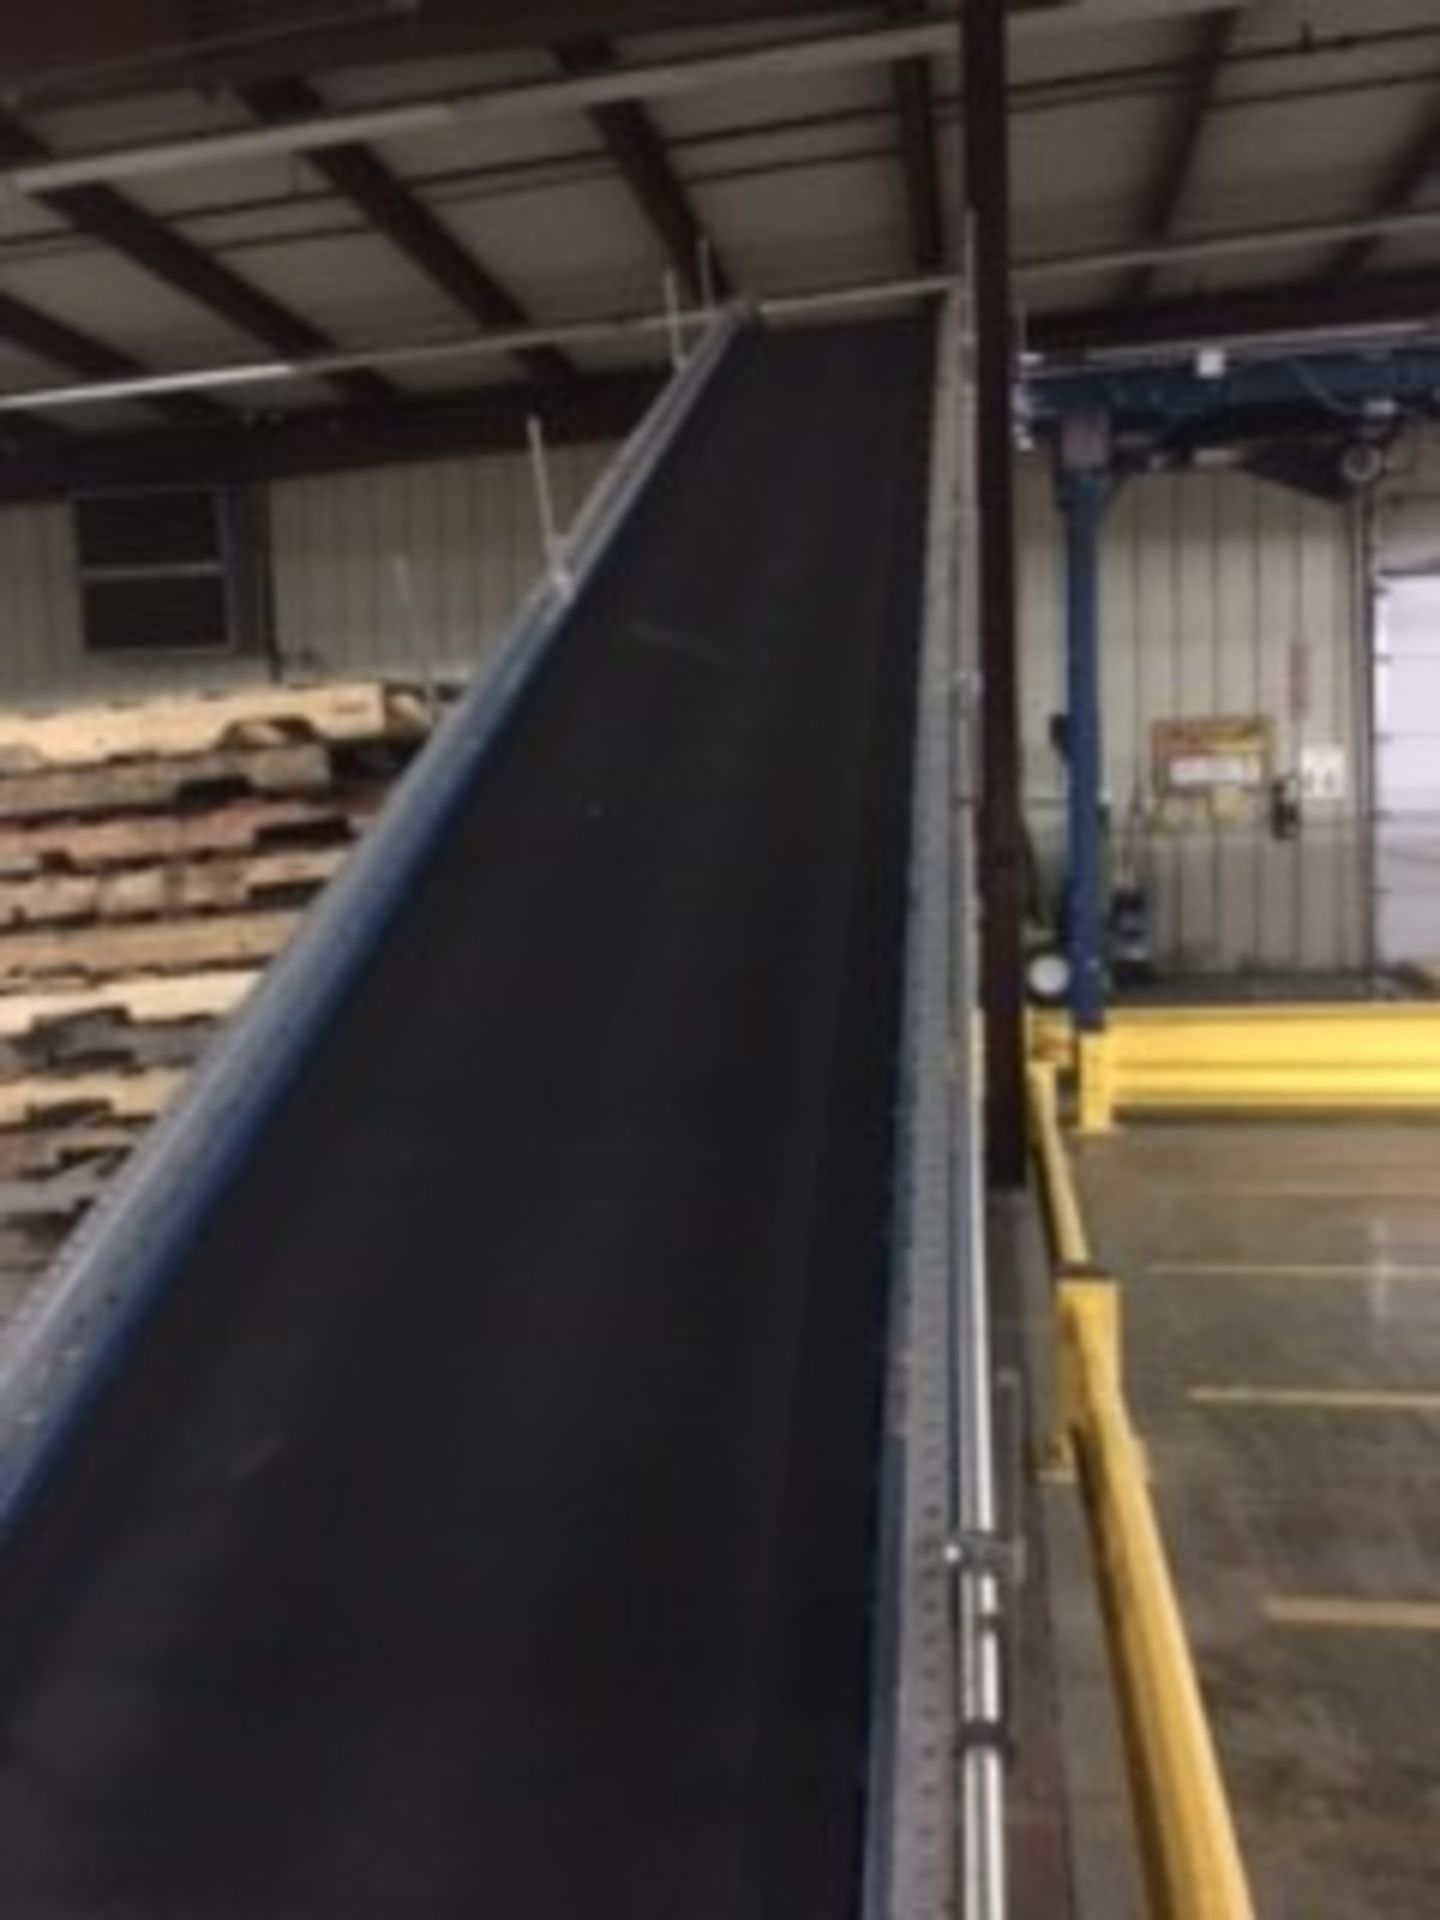 390’ (+-) TGW ERMANCO POWERED CONVEYOR SYSTEM, 22”-28” ROLLERS - Image 7 of 12